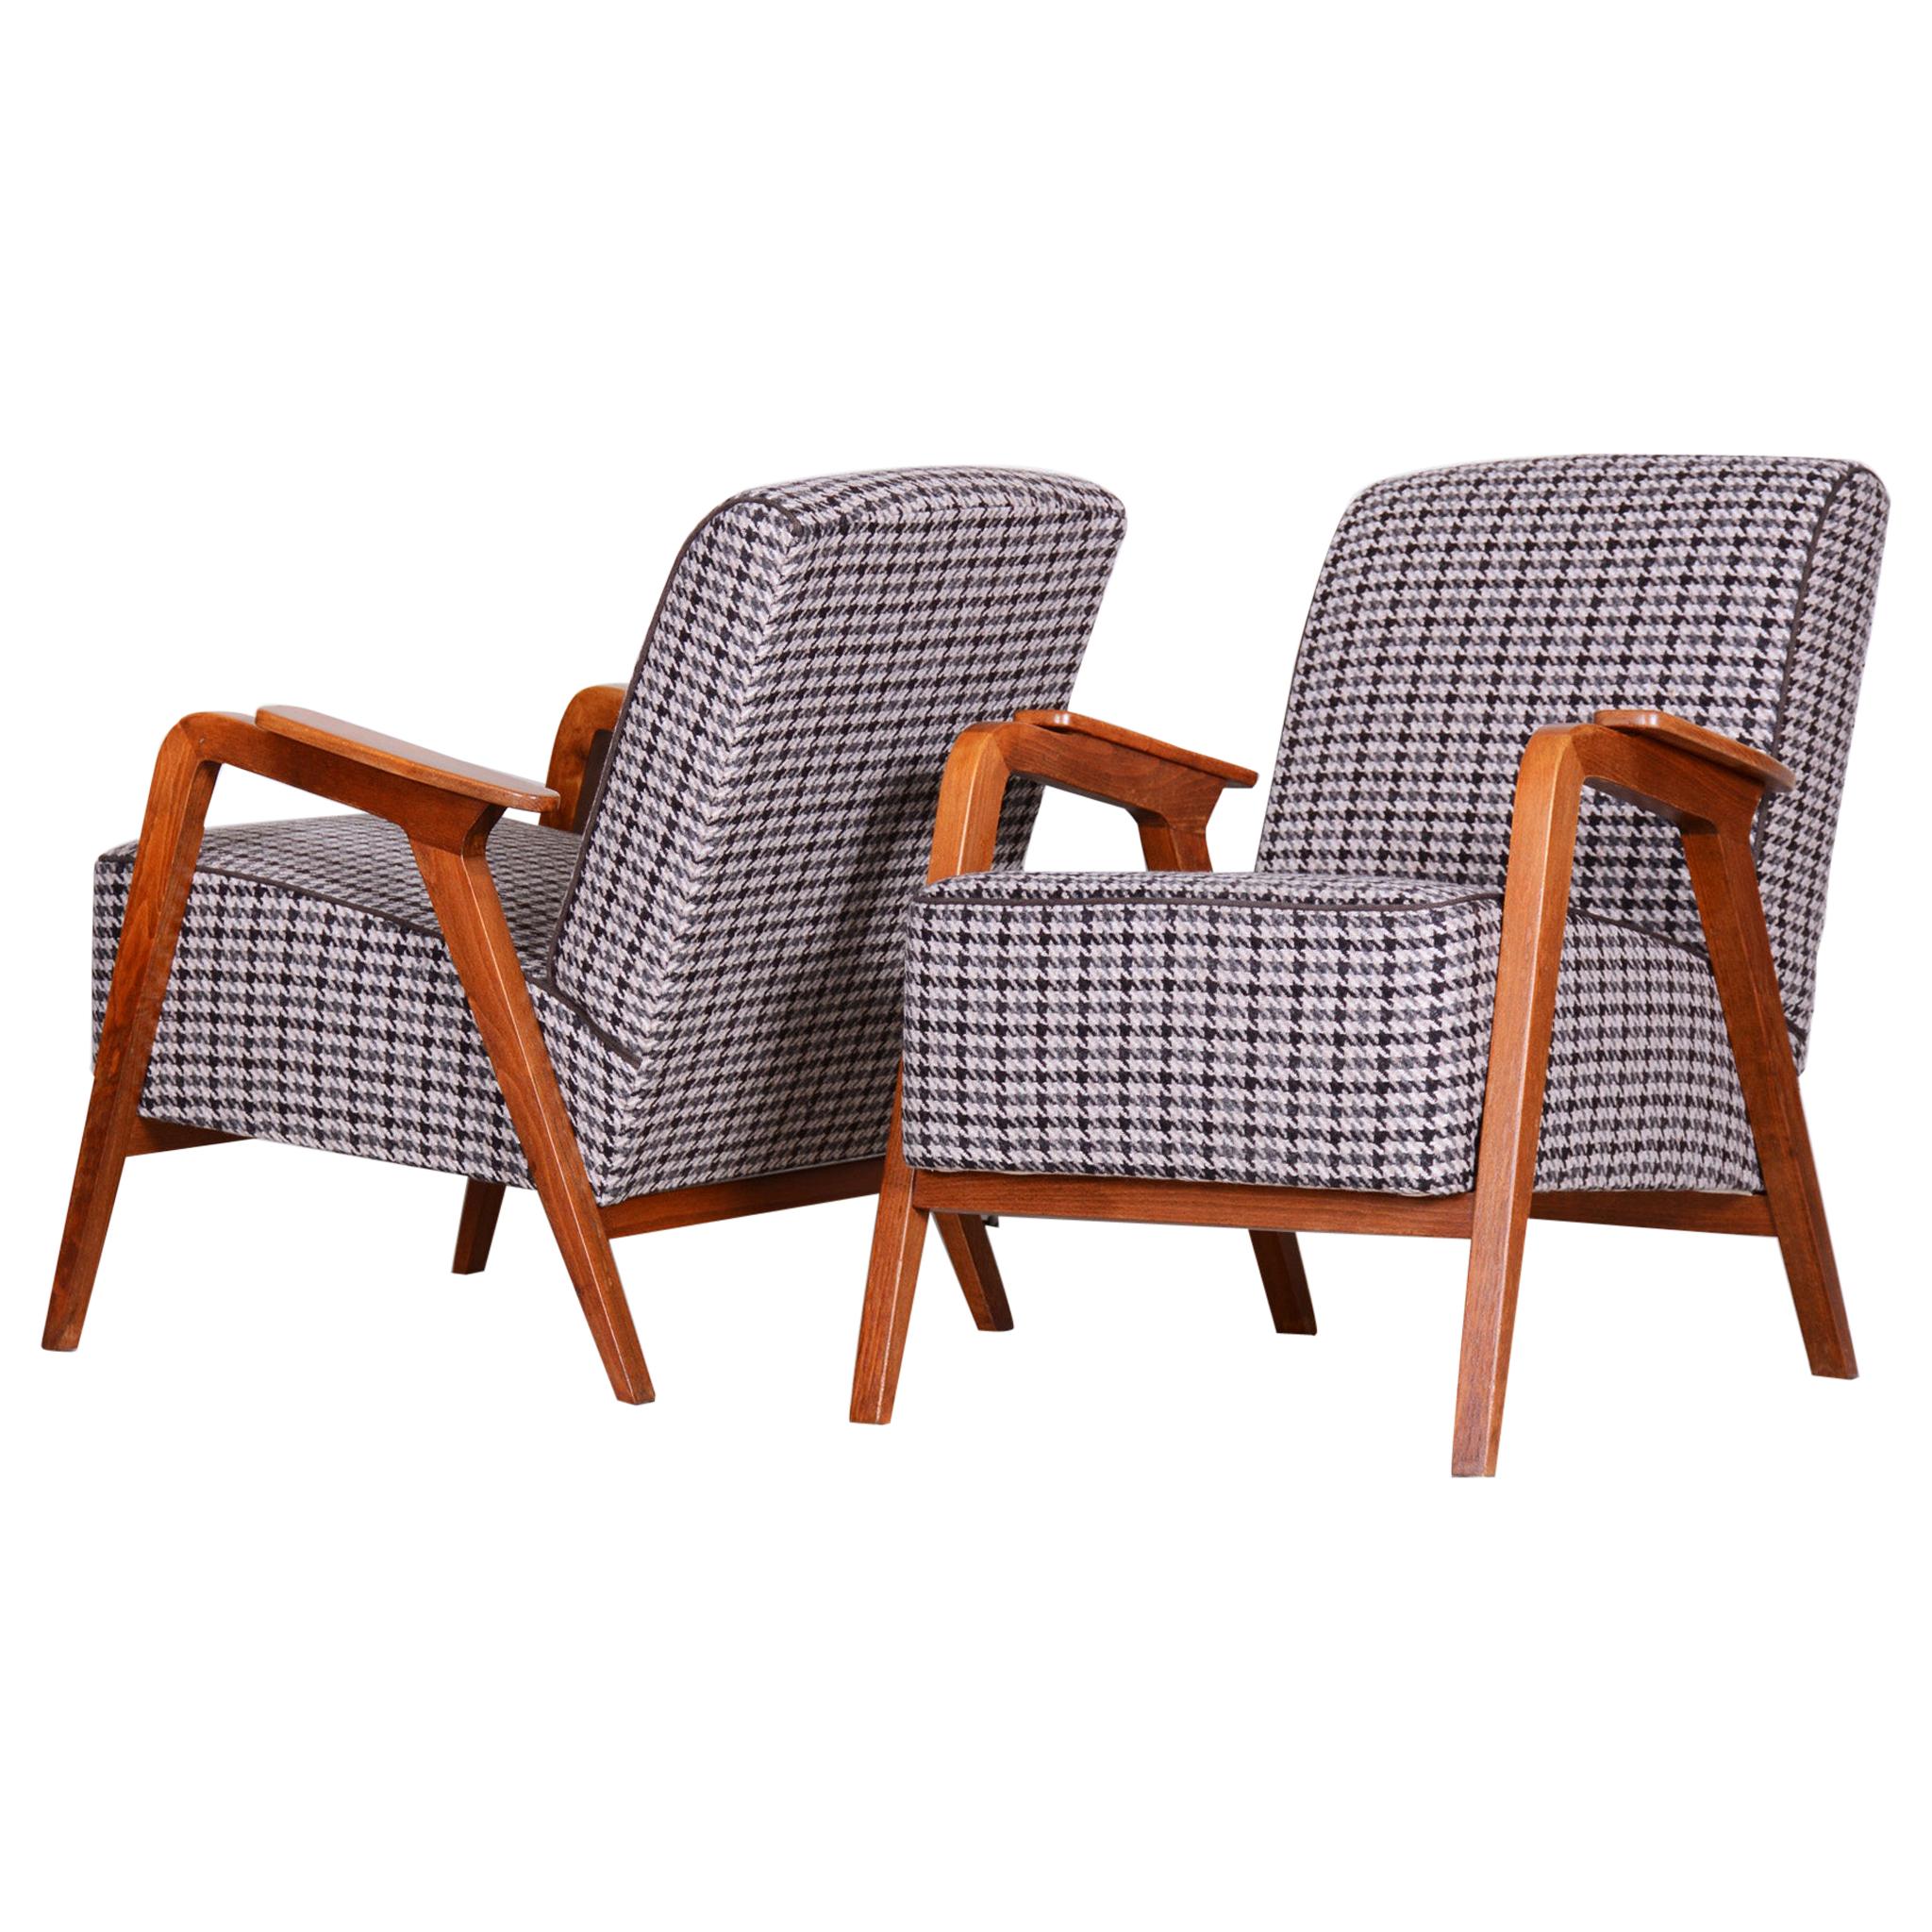 Pair of Restored Czech Midcentury Brown Beech Armchairs, 1940s, New Upholstery